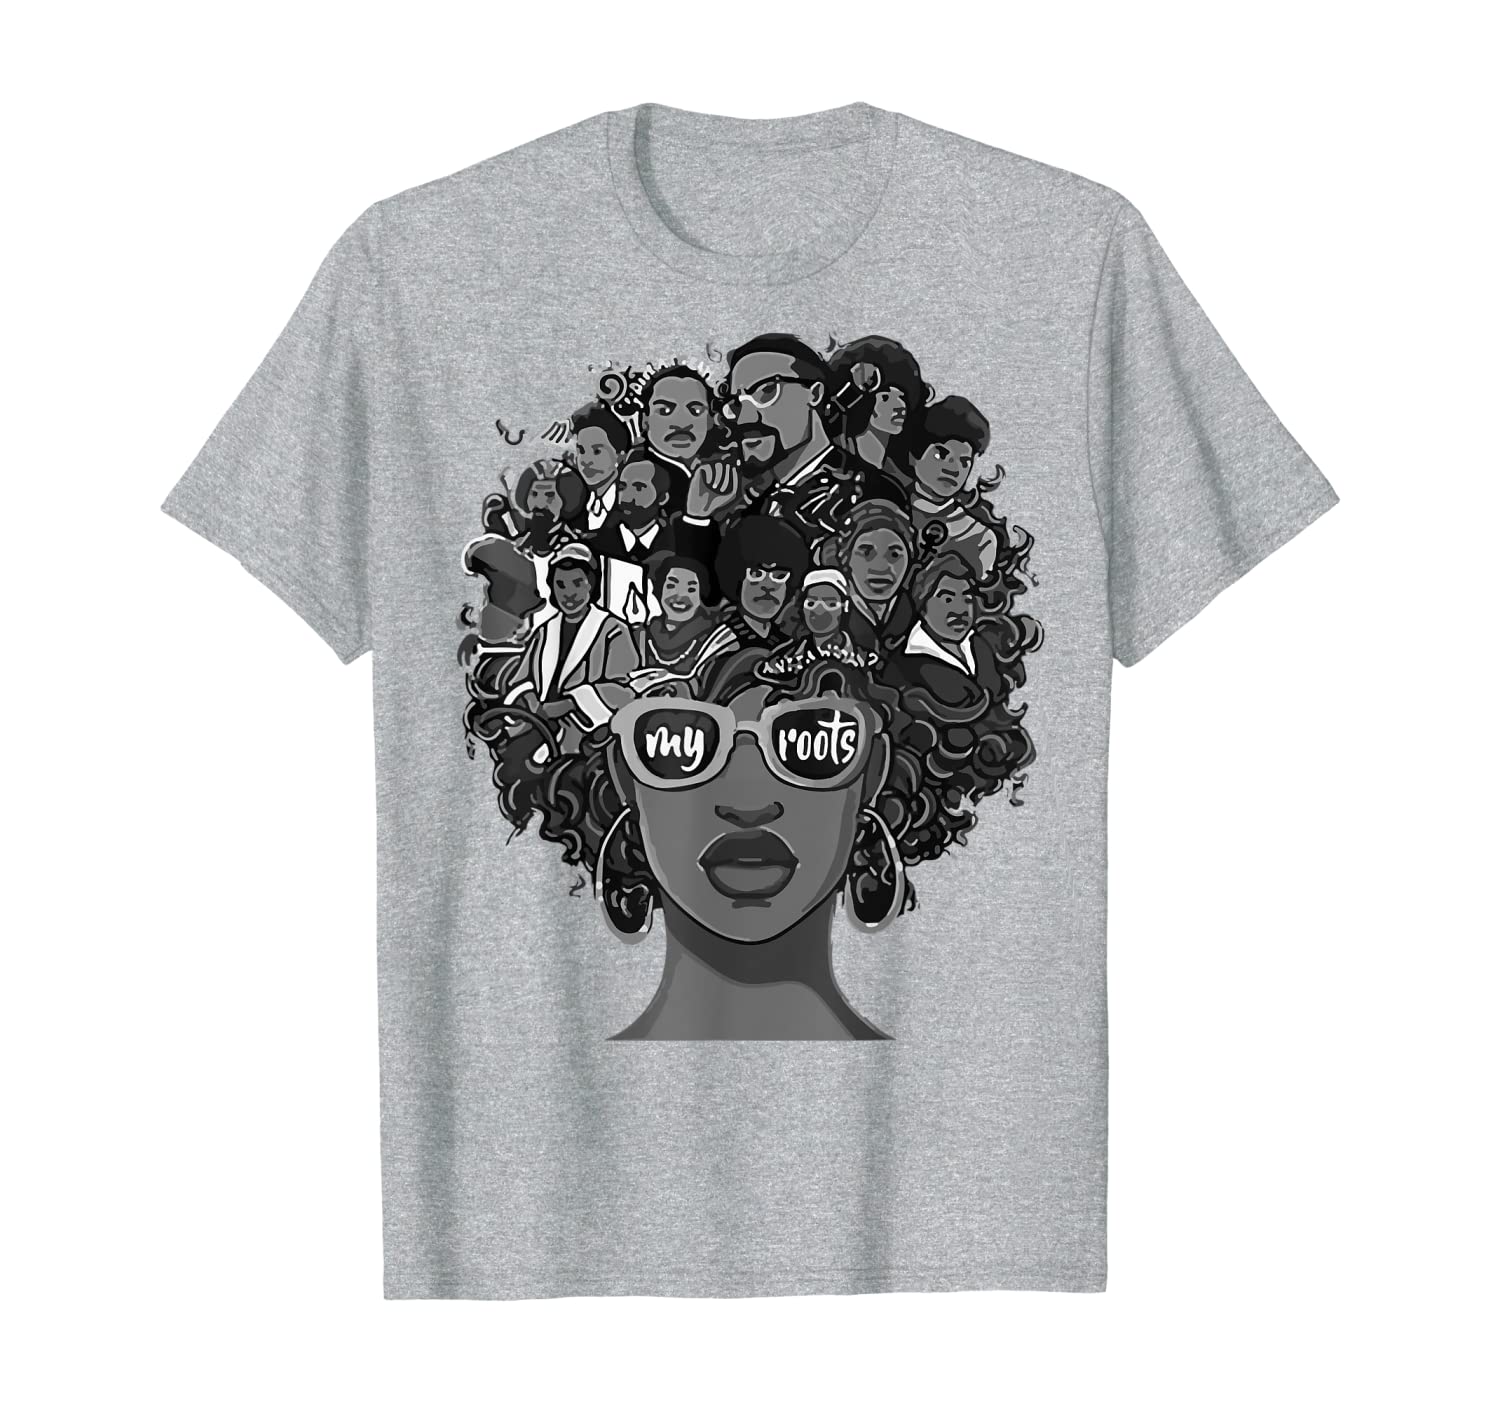 

I Love My Roots Back Powerful Black History Month Pride Gift T-Shirt, Mainly pictures